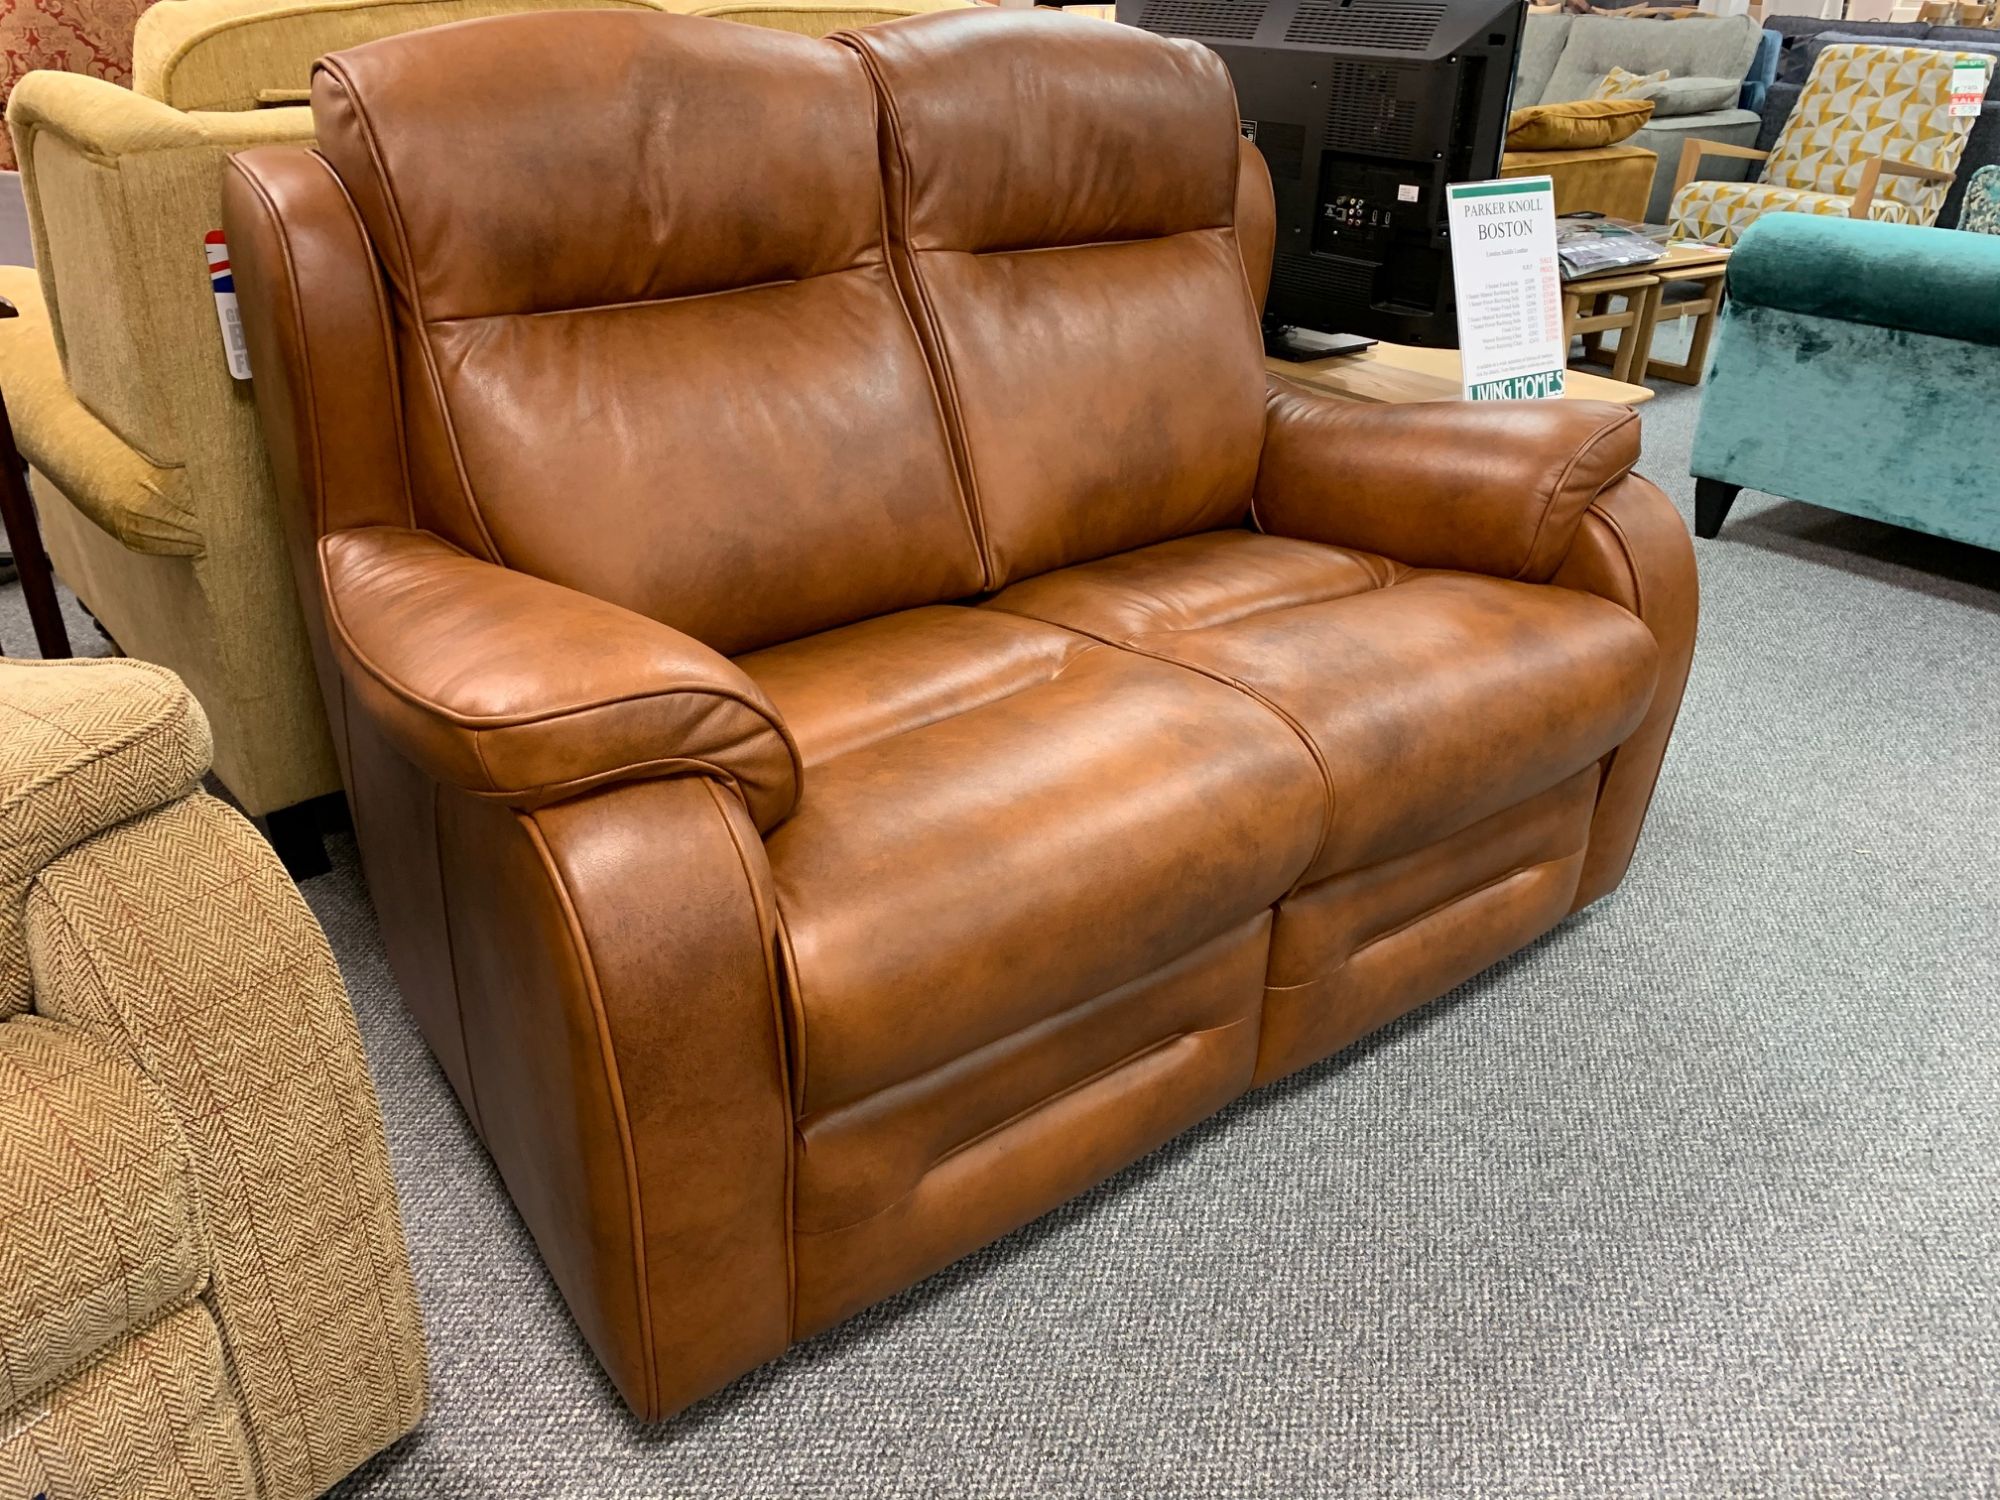 4th of july leather sofa sales